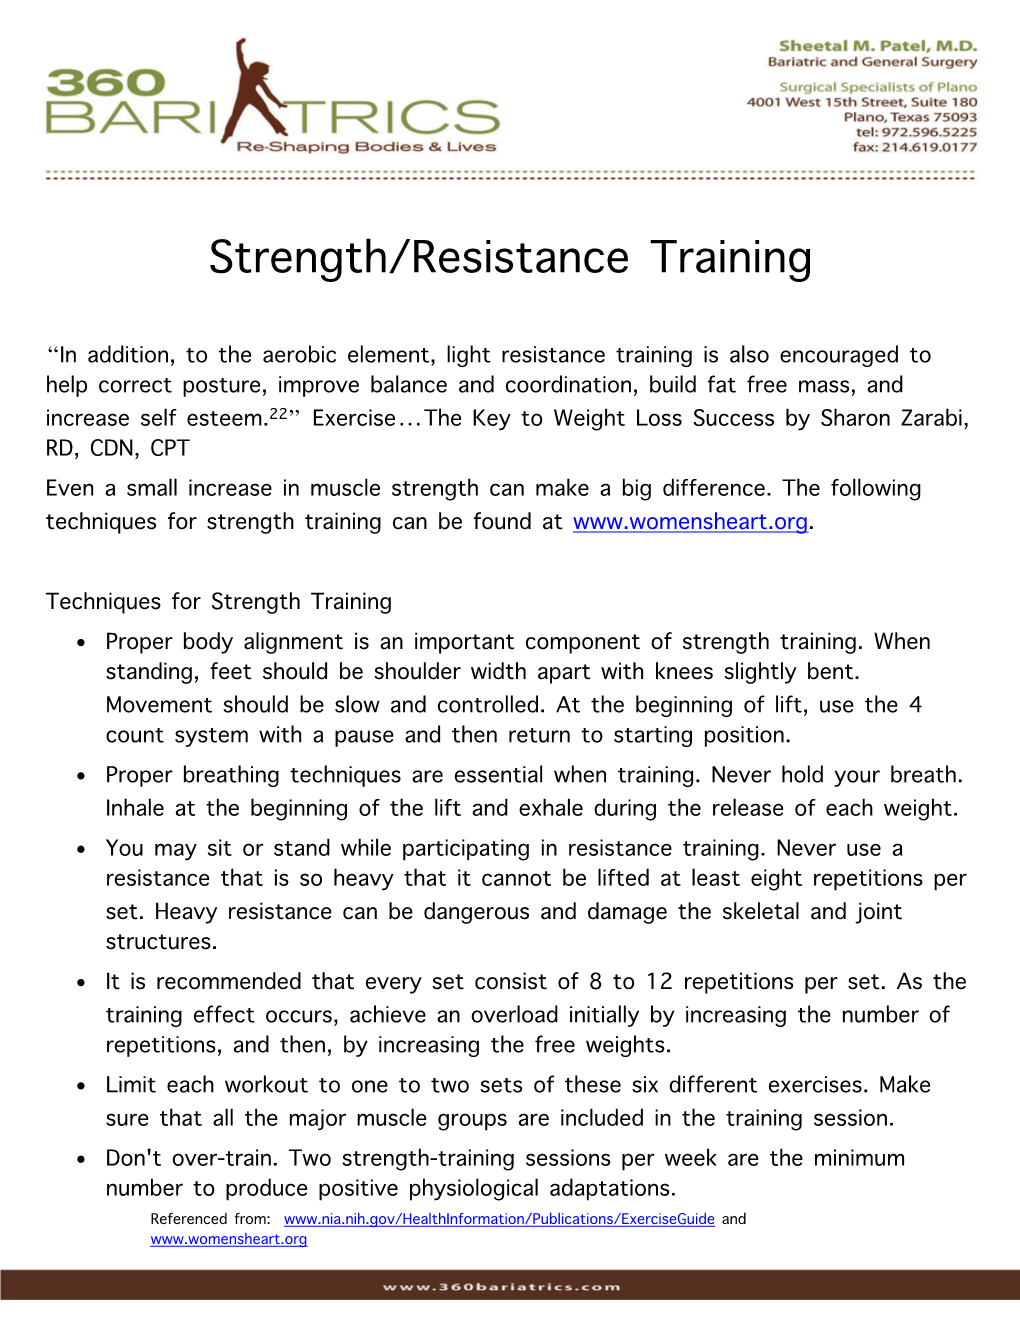 Strength Training Can Be Found At